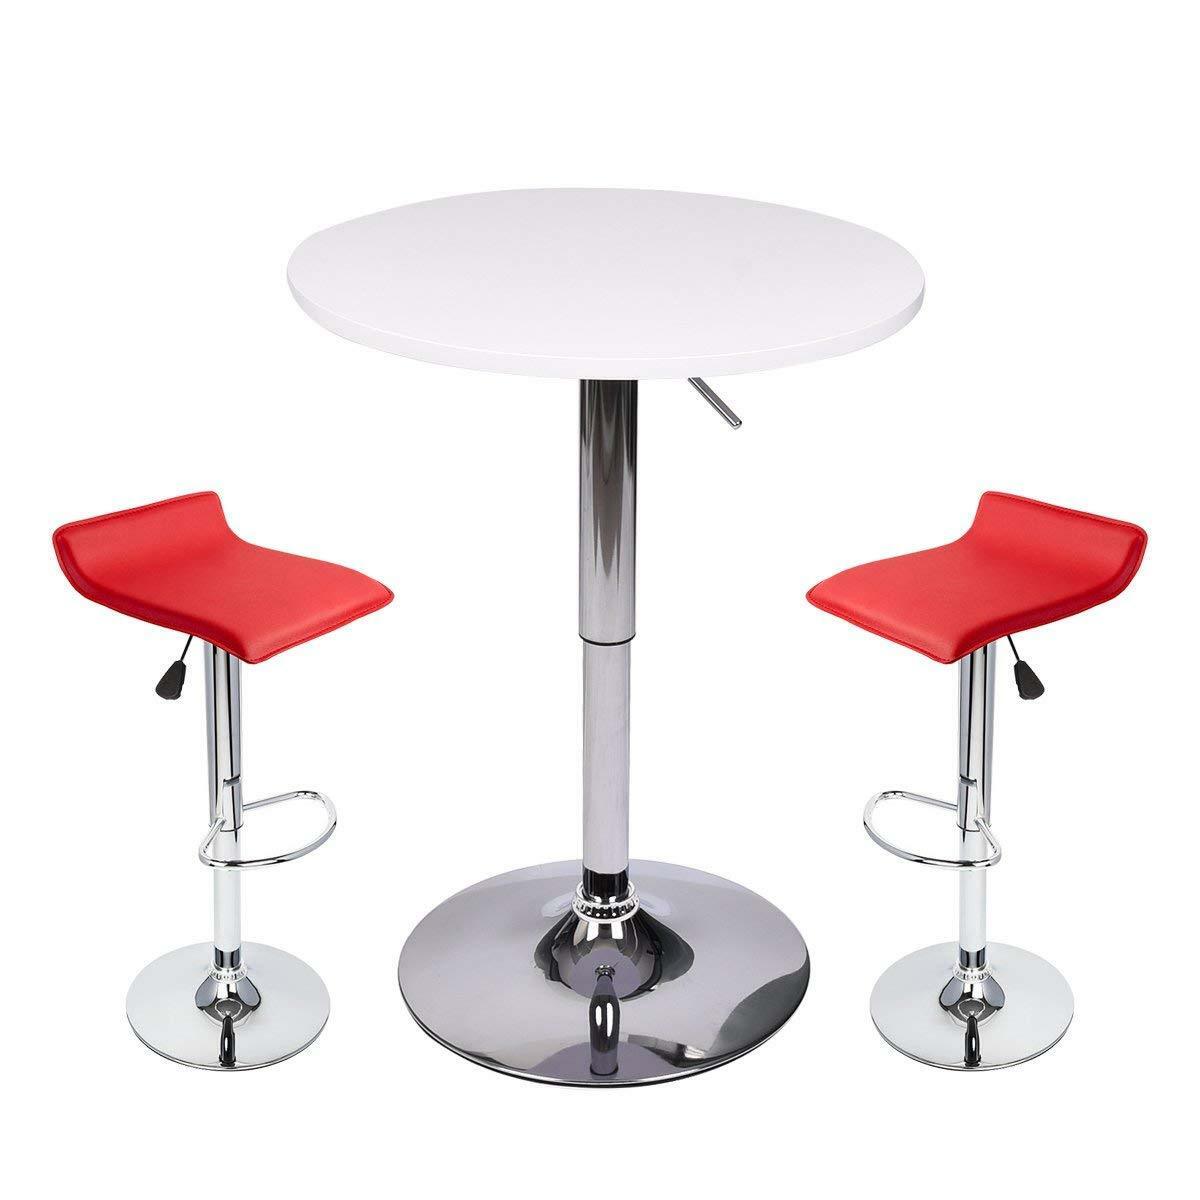 3 Piece Pub Table Set Bar Stool Counter Height Bistro Kitchen Dining Chair Round